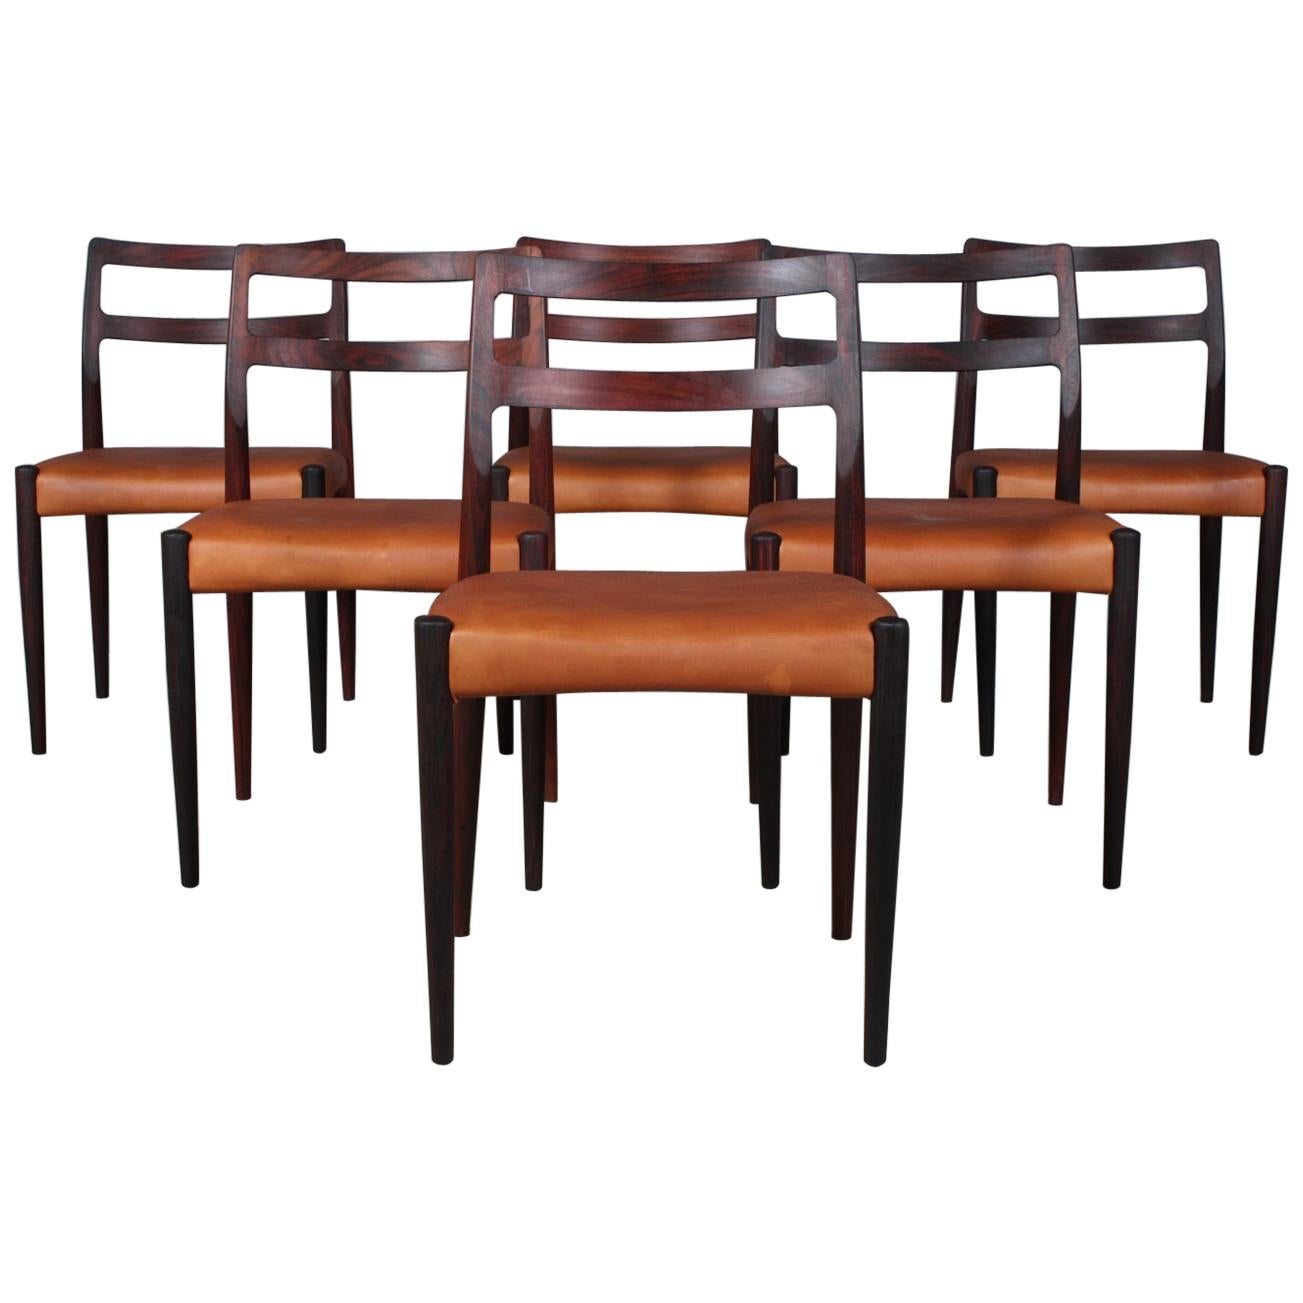 Johannes Andersen Six Dining Chairs, Model Anna, Rosewood and Leather Upholstery